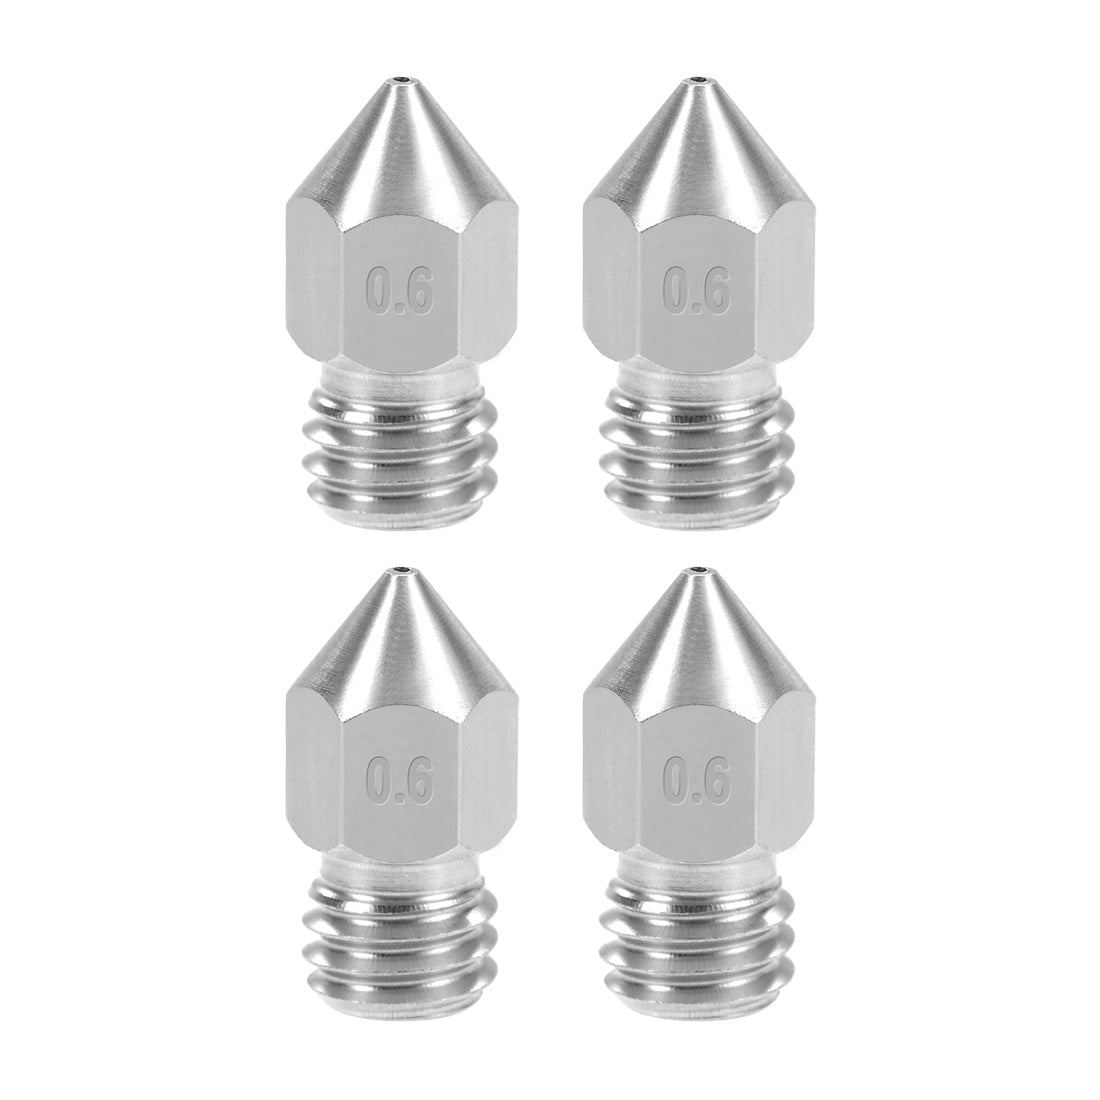 uxcell Uxcell 0.6mm 3D Printer Nozzles Head M6 for MK8 1.75mm, Stainless Steel 4pcs